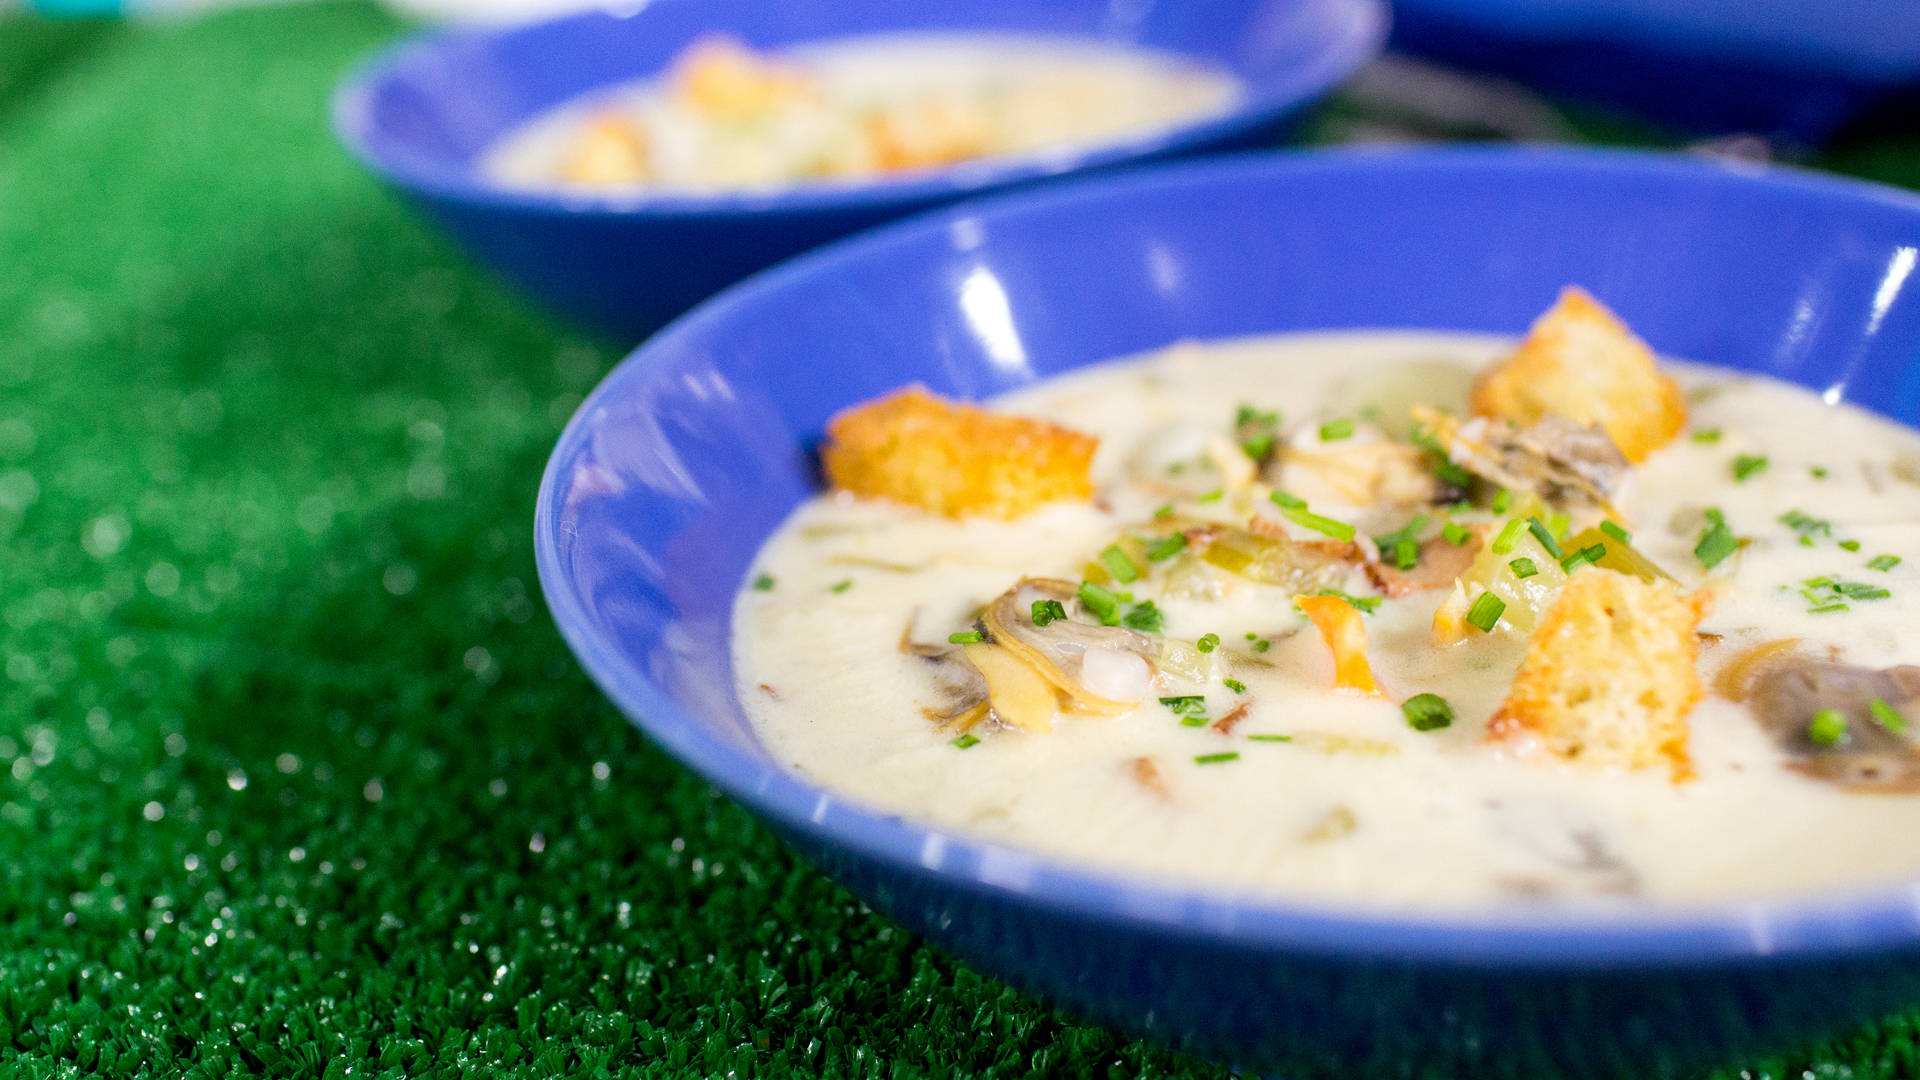 Flavorful New England Clam Chowder In A Bowl Wallpaper